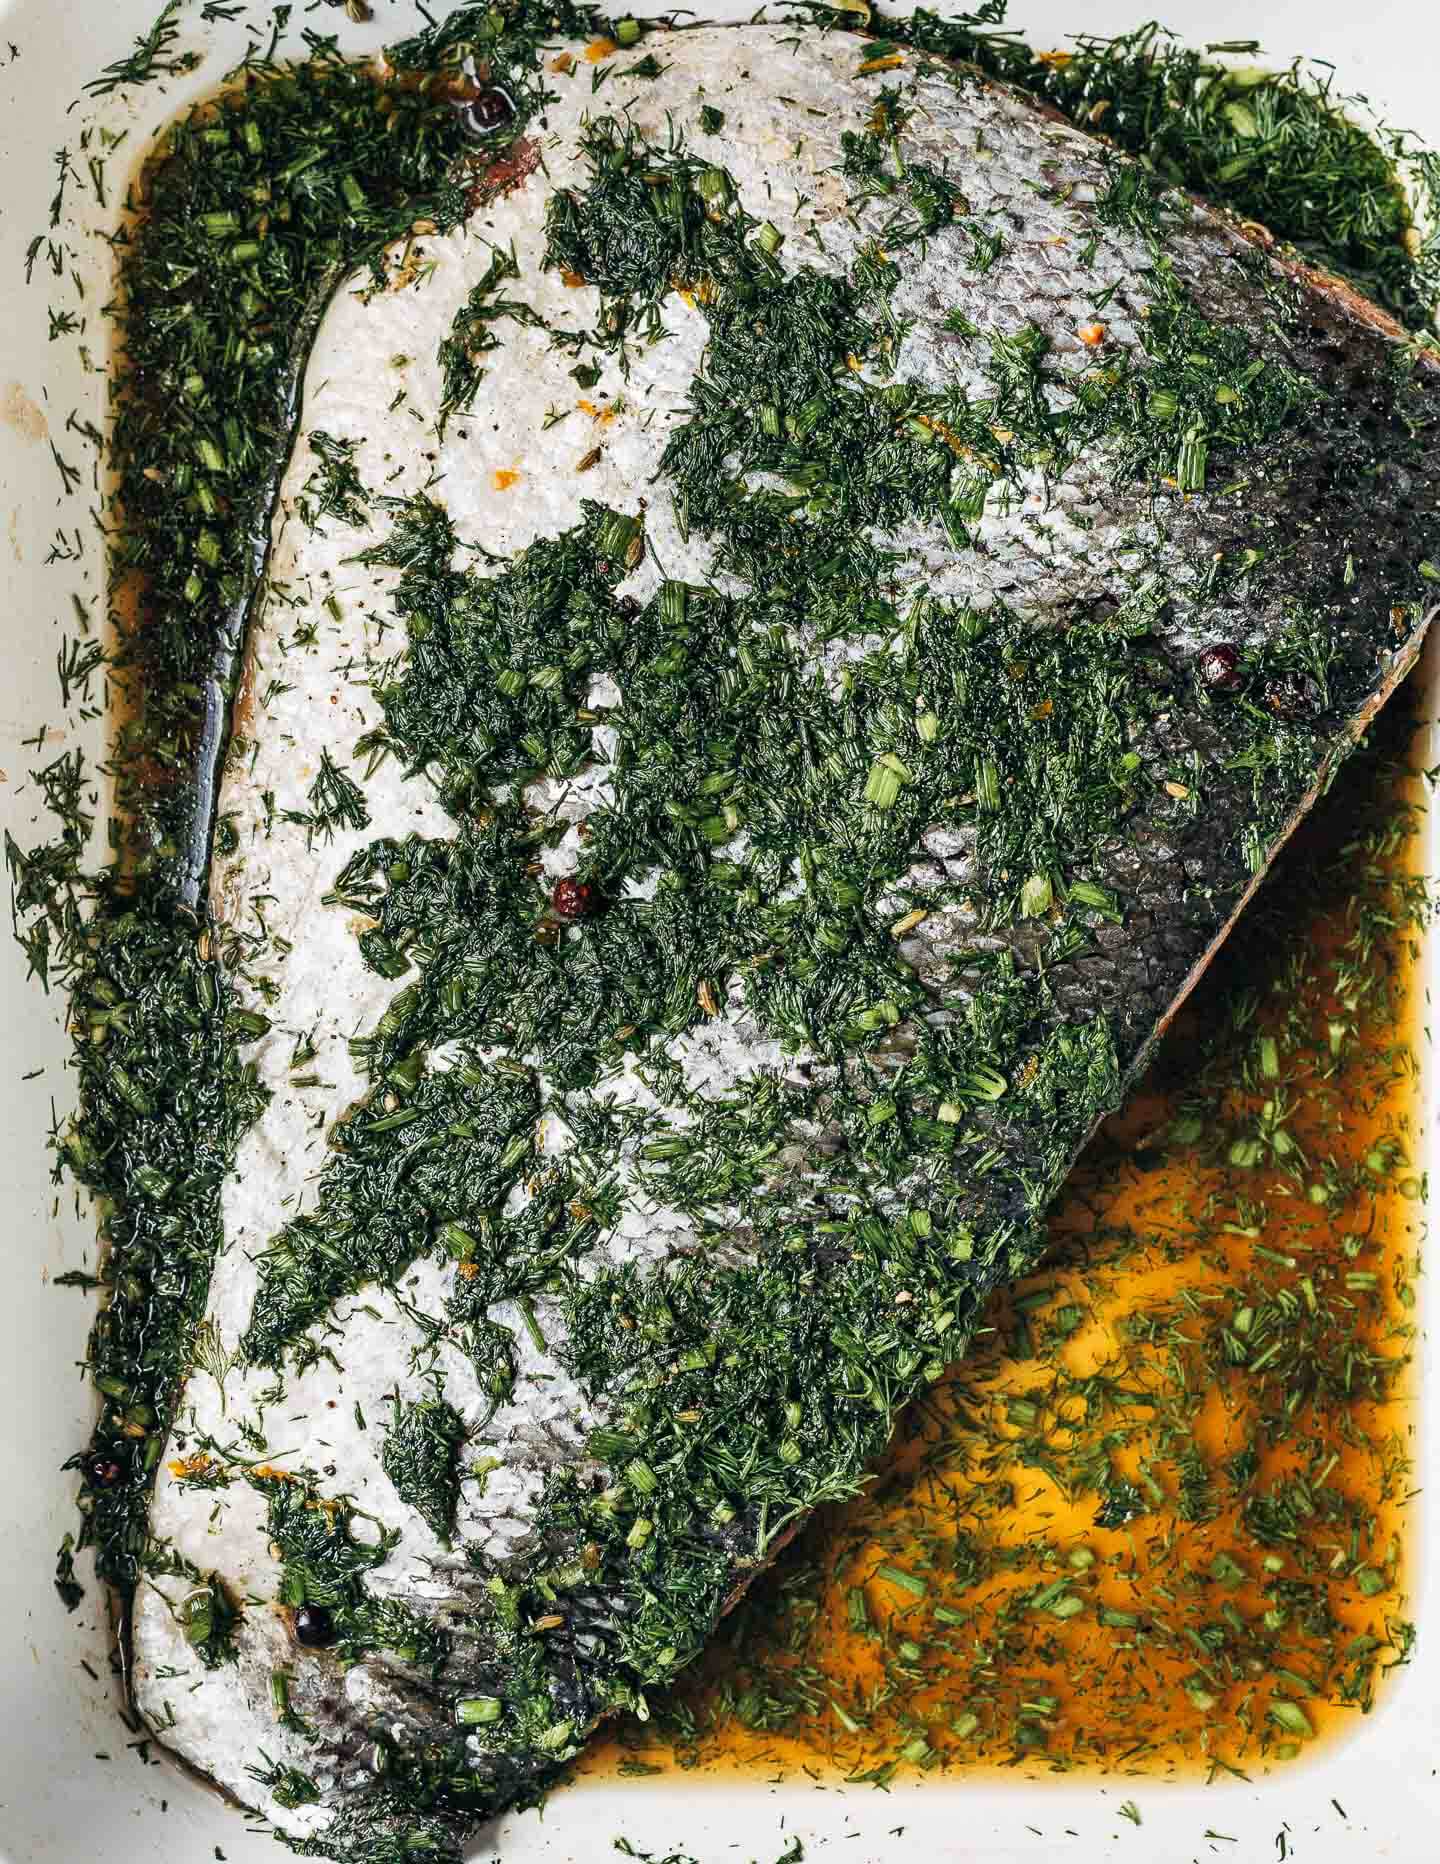 The skin of a cured salmon filet with dill and spices clinging to the skin. 